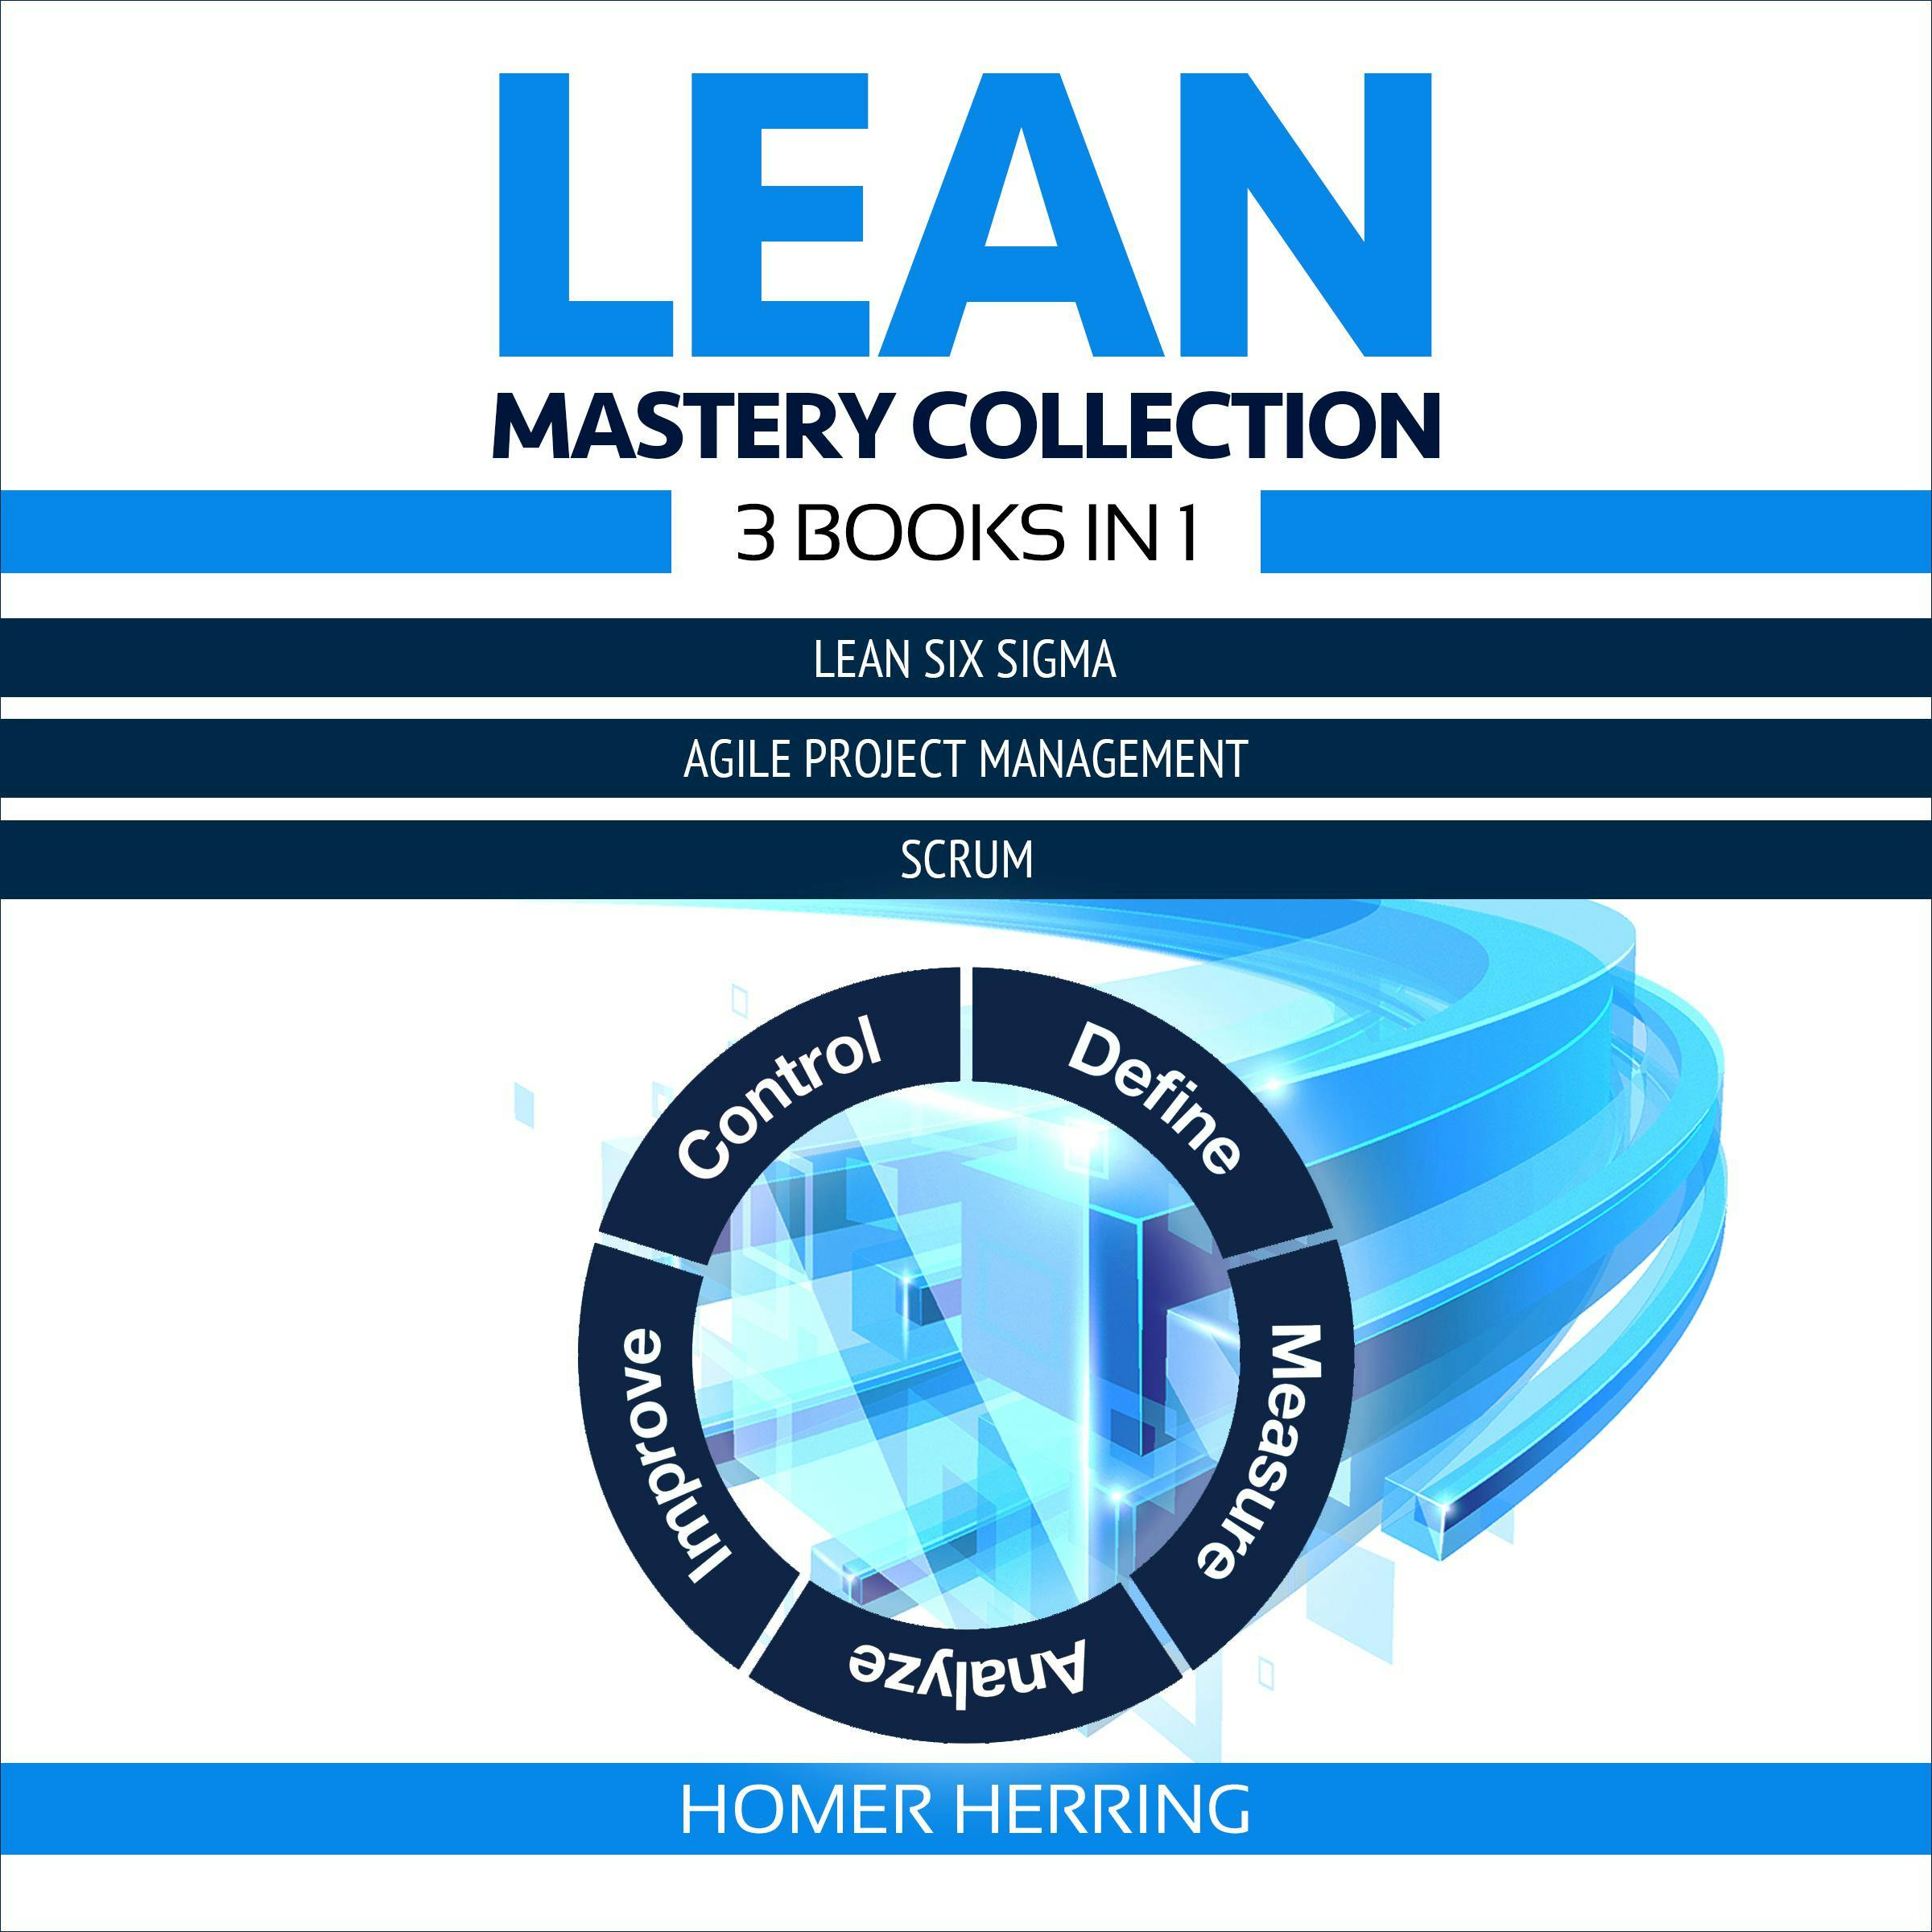 Lean Mastery Collection: 3 Books in 1: Lean Six Sigma, Agile Project Management, Scrum - Homer Herring